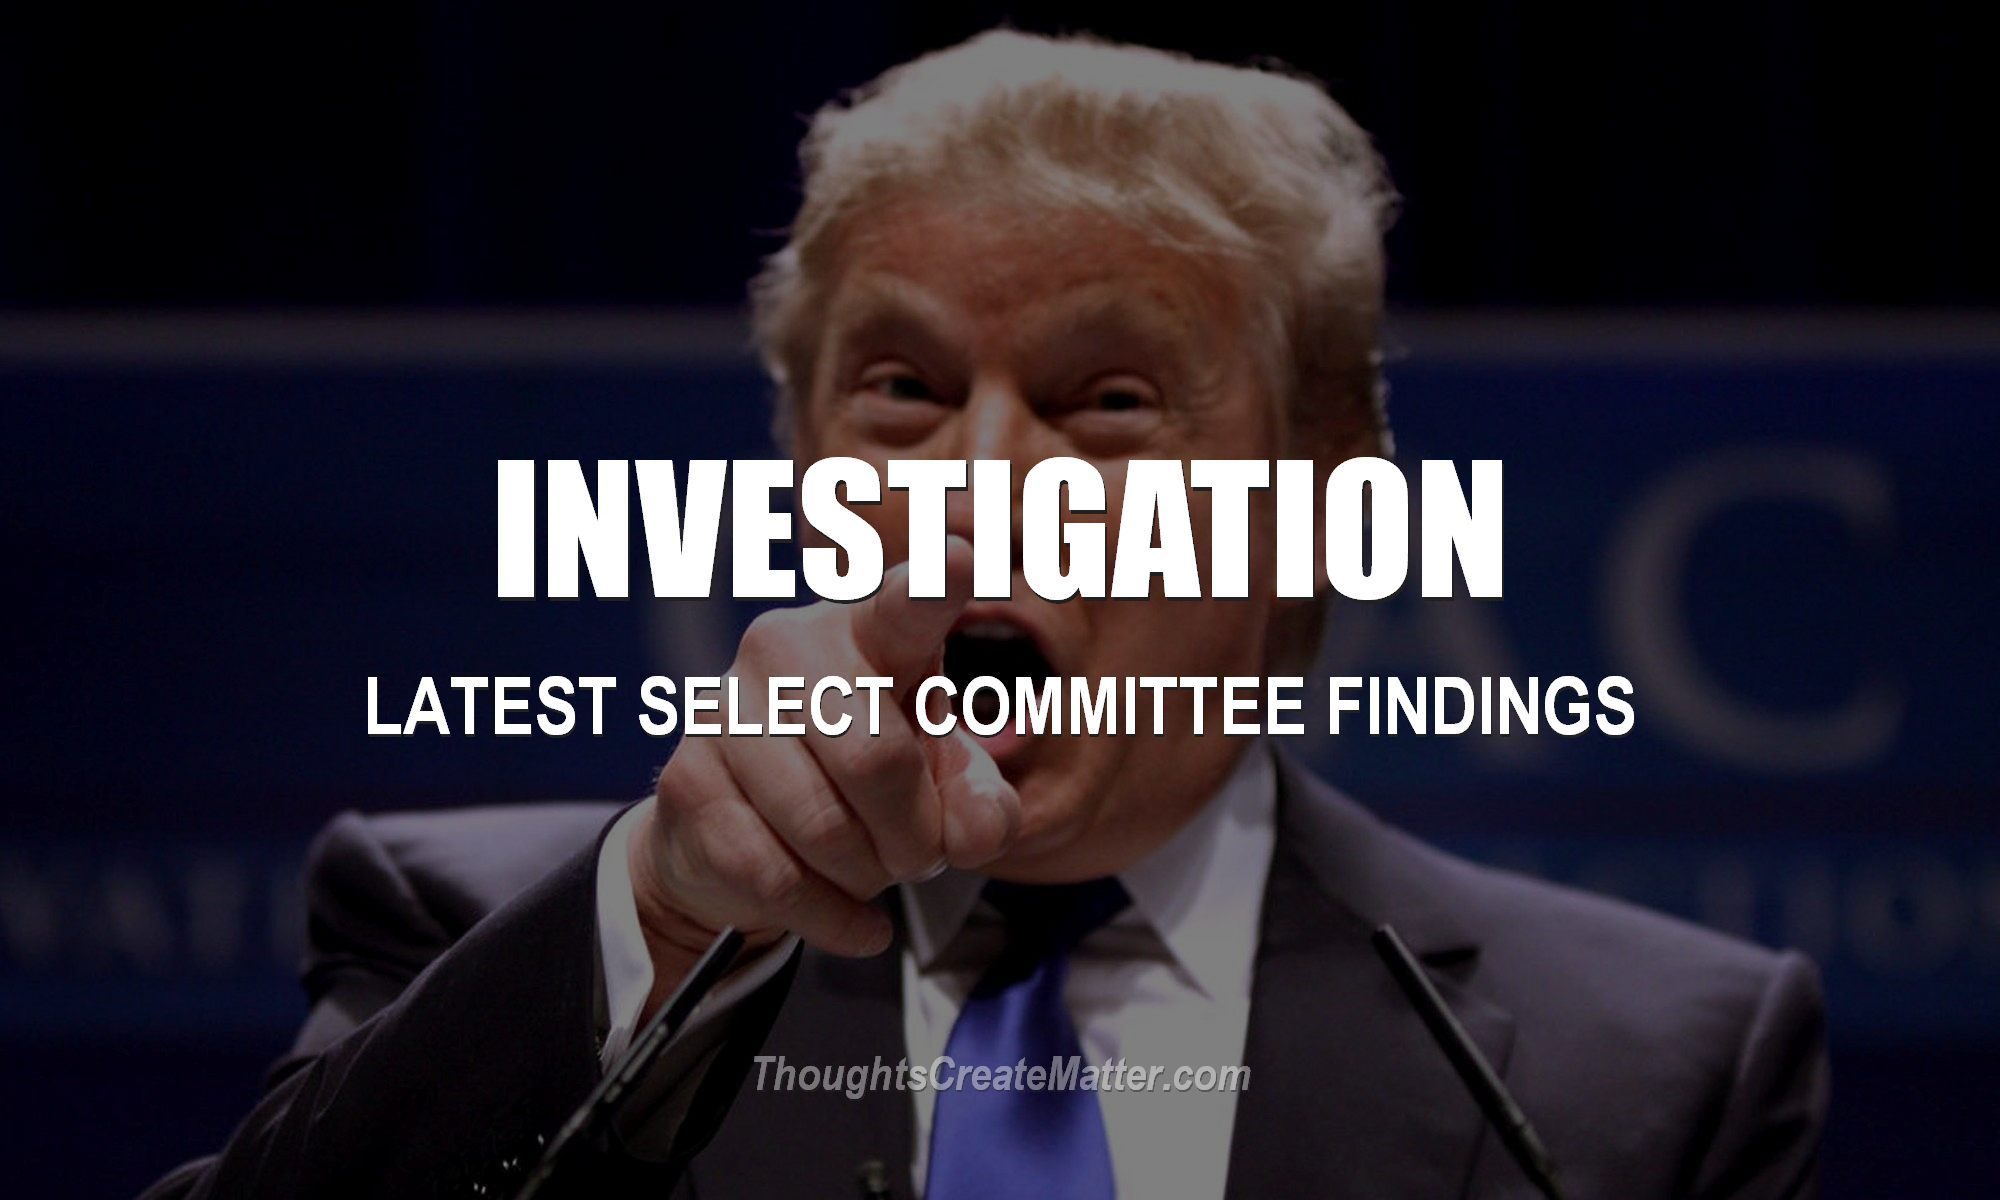 Select committee investigation findings of Trump. Will Trump be indicted, arrested and sent to prison? Latest current updates and article.